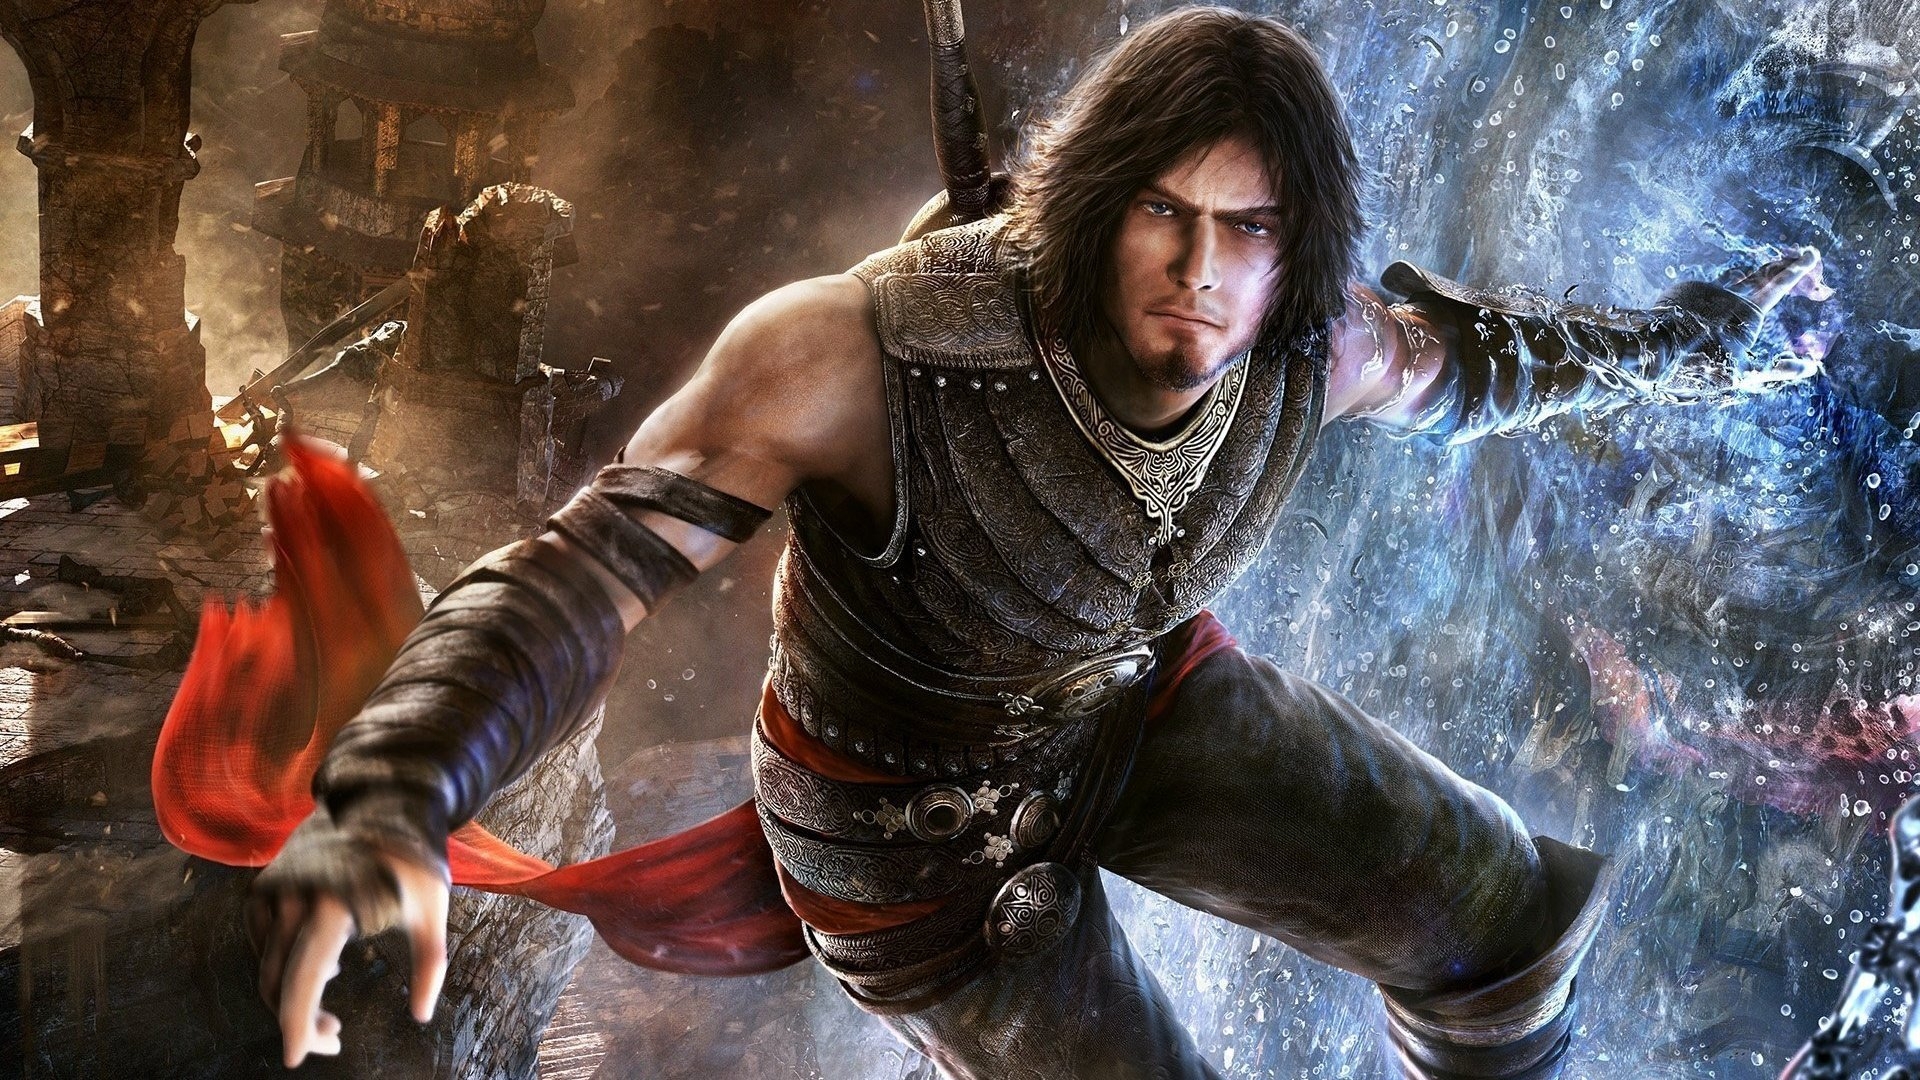 Prince of Persia Character for 1920 x 1080 HDTV 1080p resolution